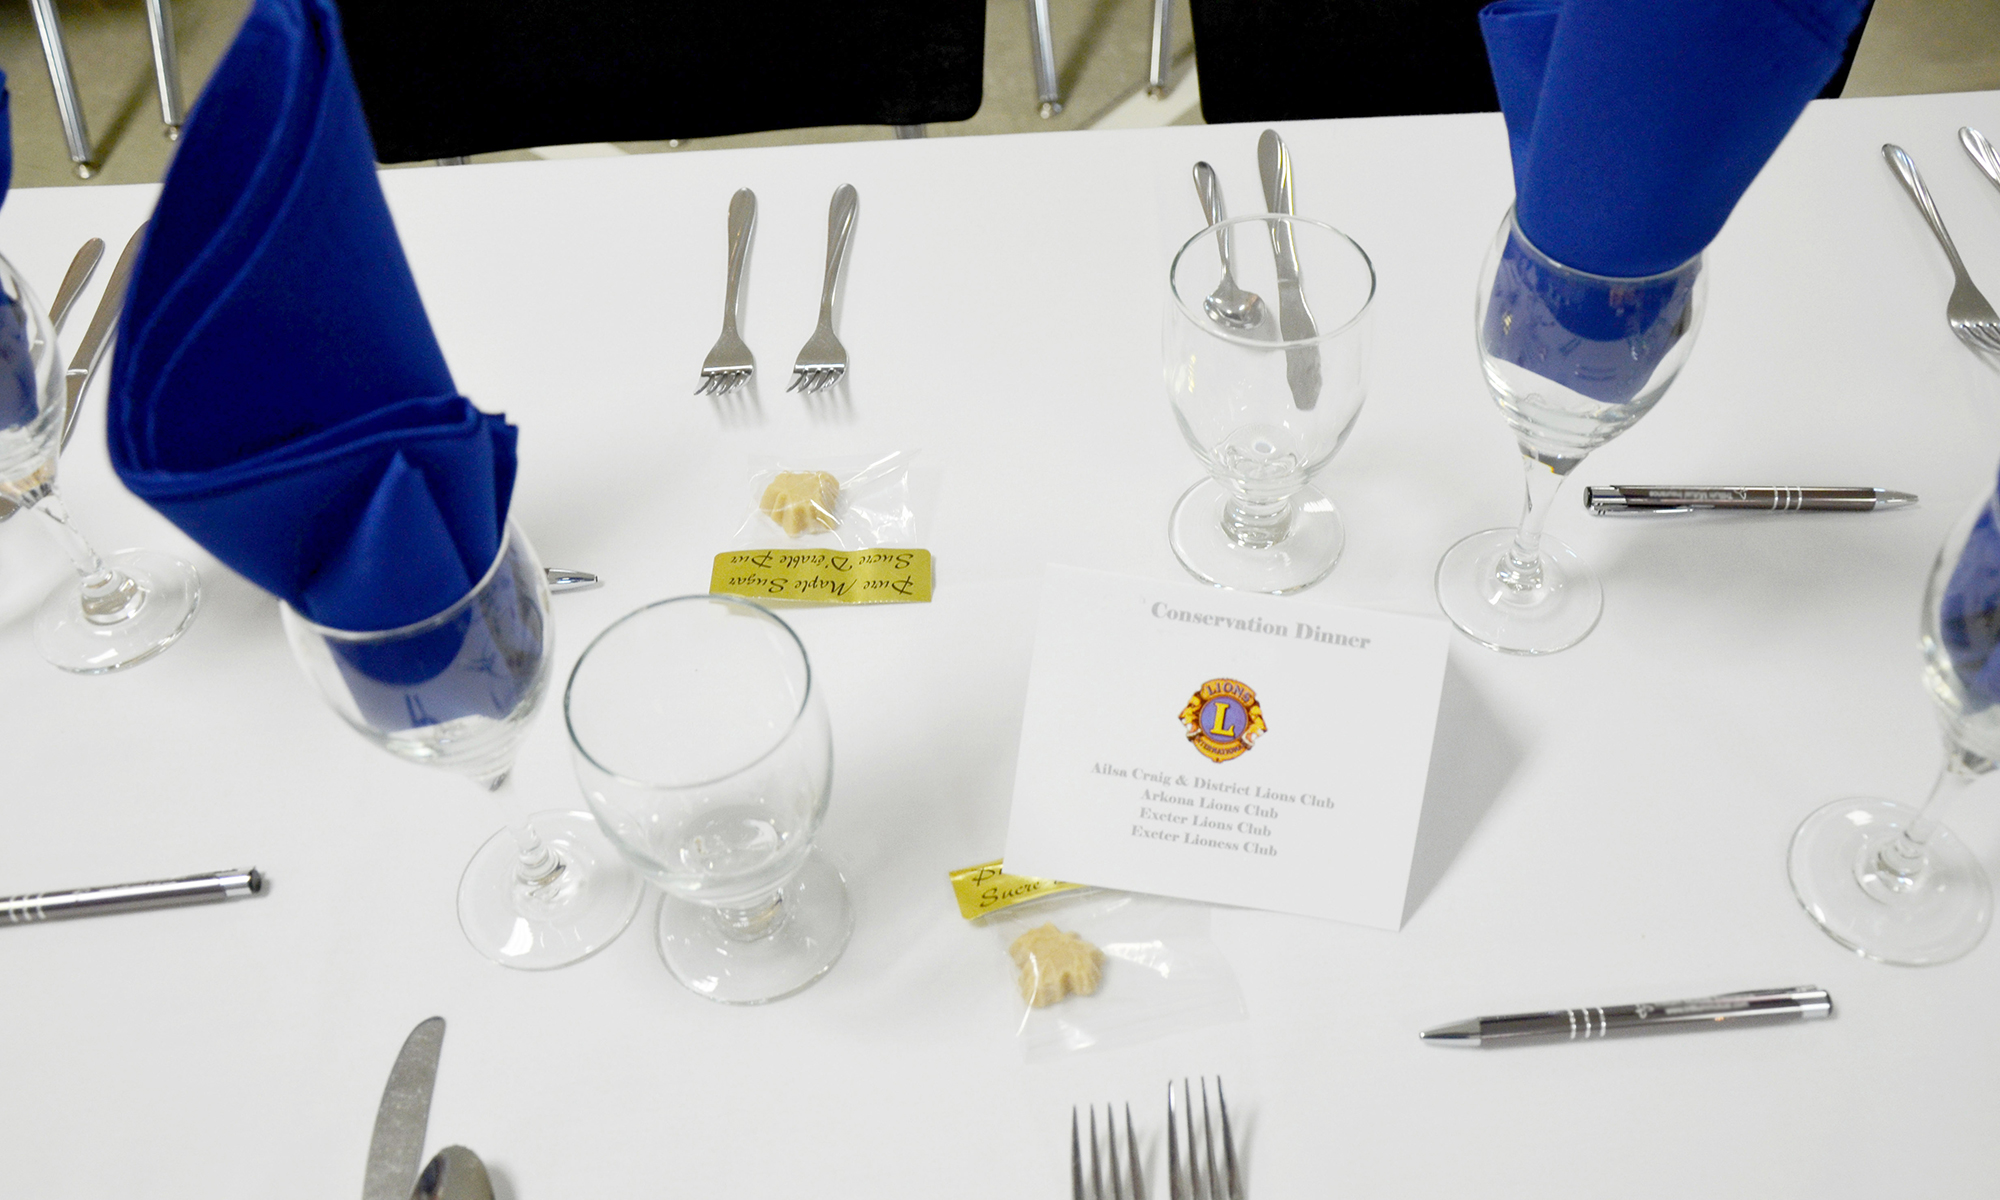 Photo of table at Conservation Dinner